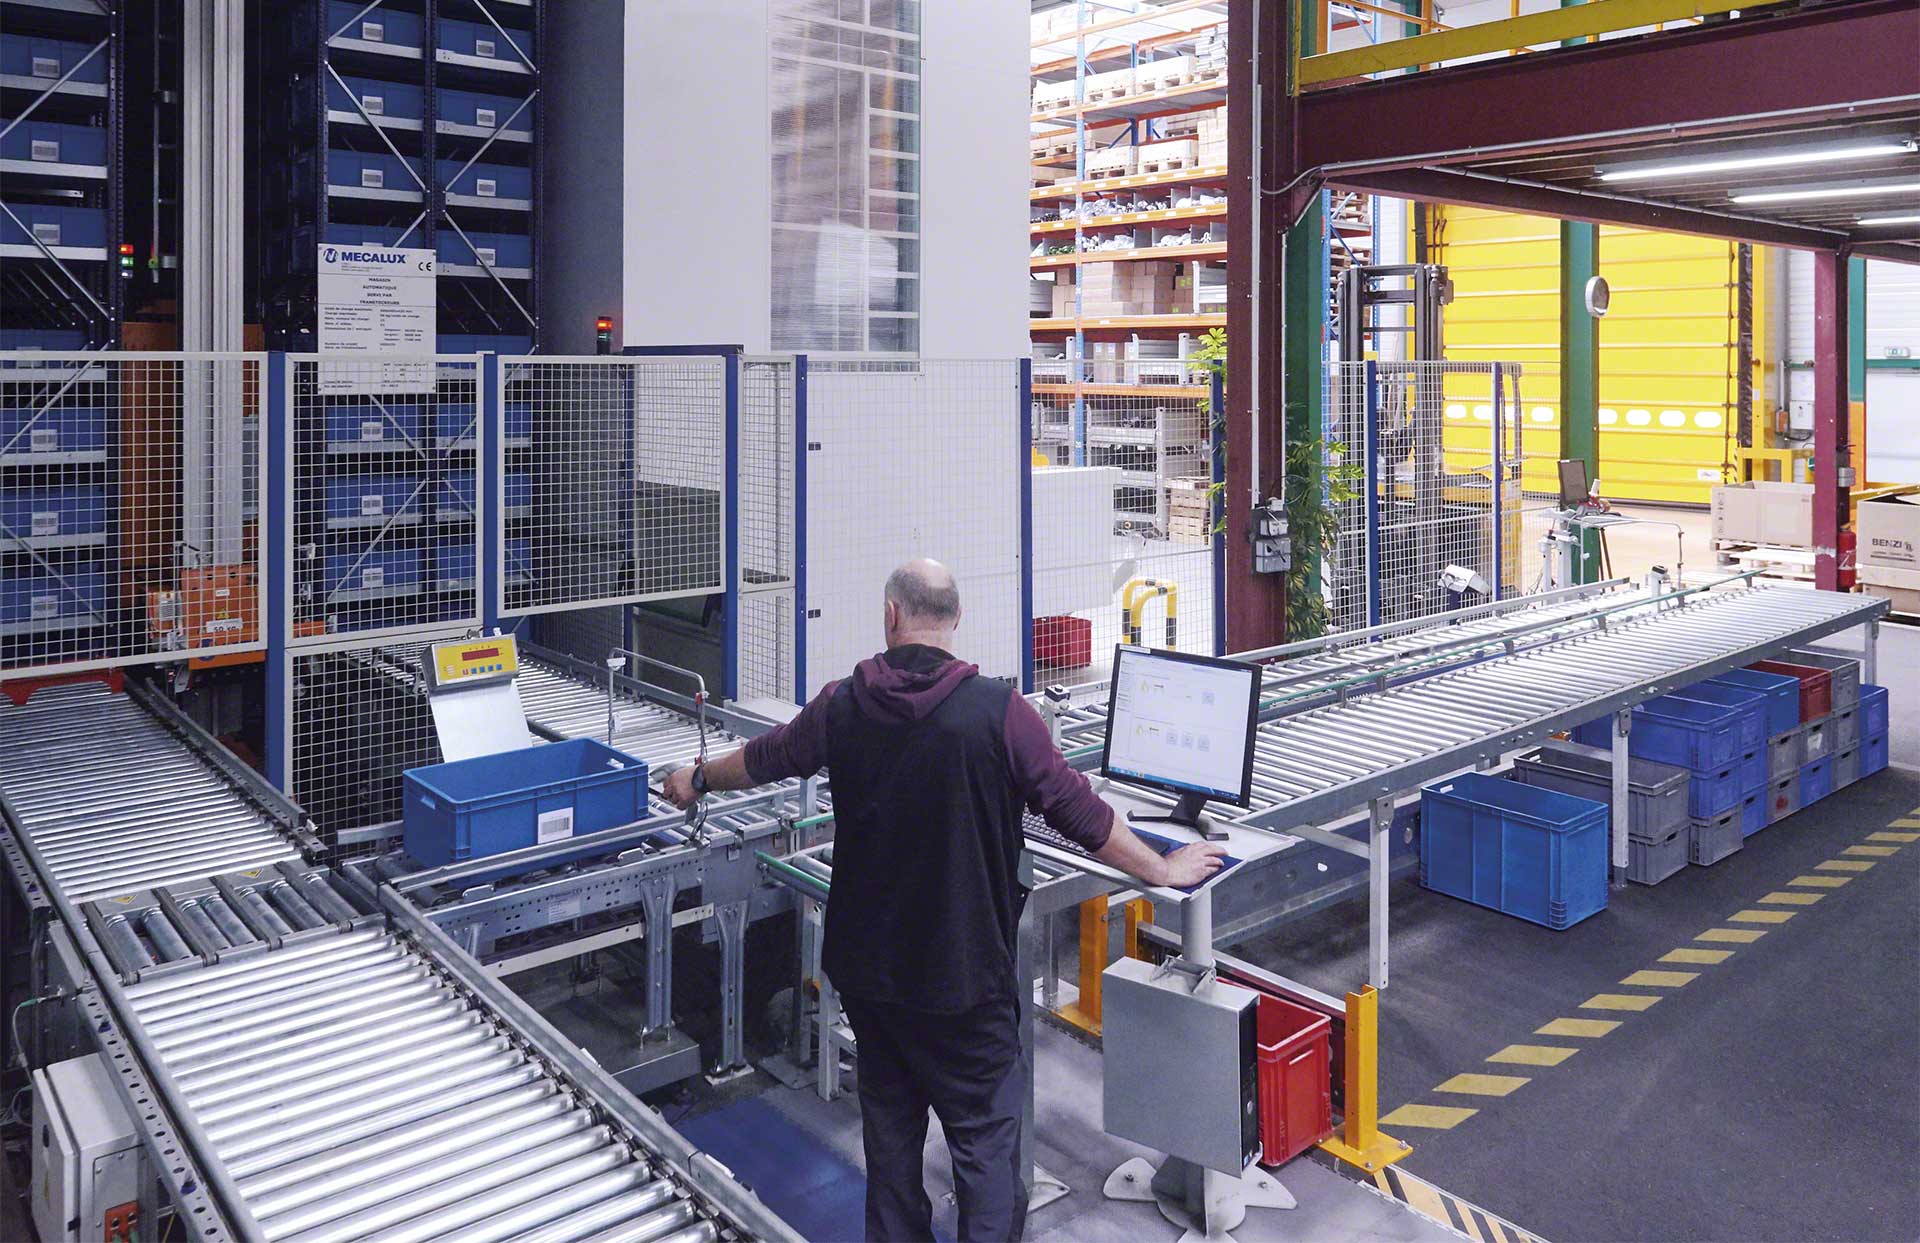 The use of IT tools in the warehouse facilitates the application of the Deming cycle